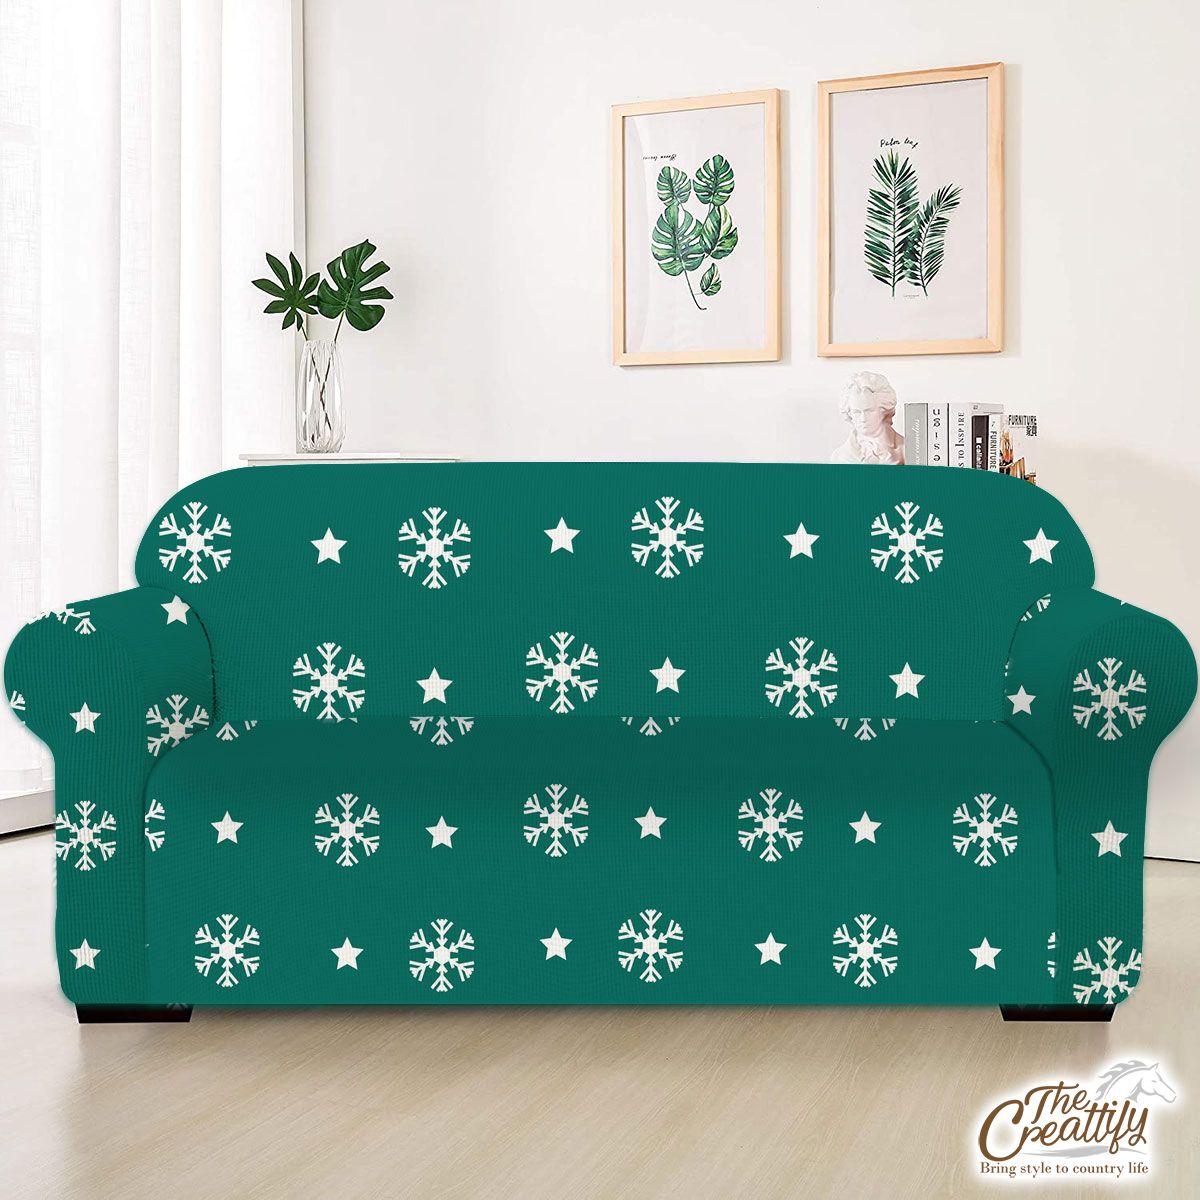 White And Dark Green Snowflake With Christmas Star Sofa Cover